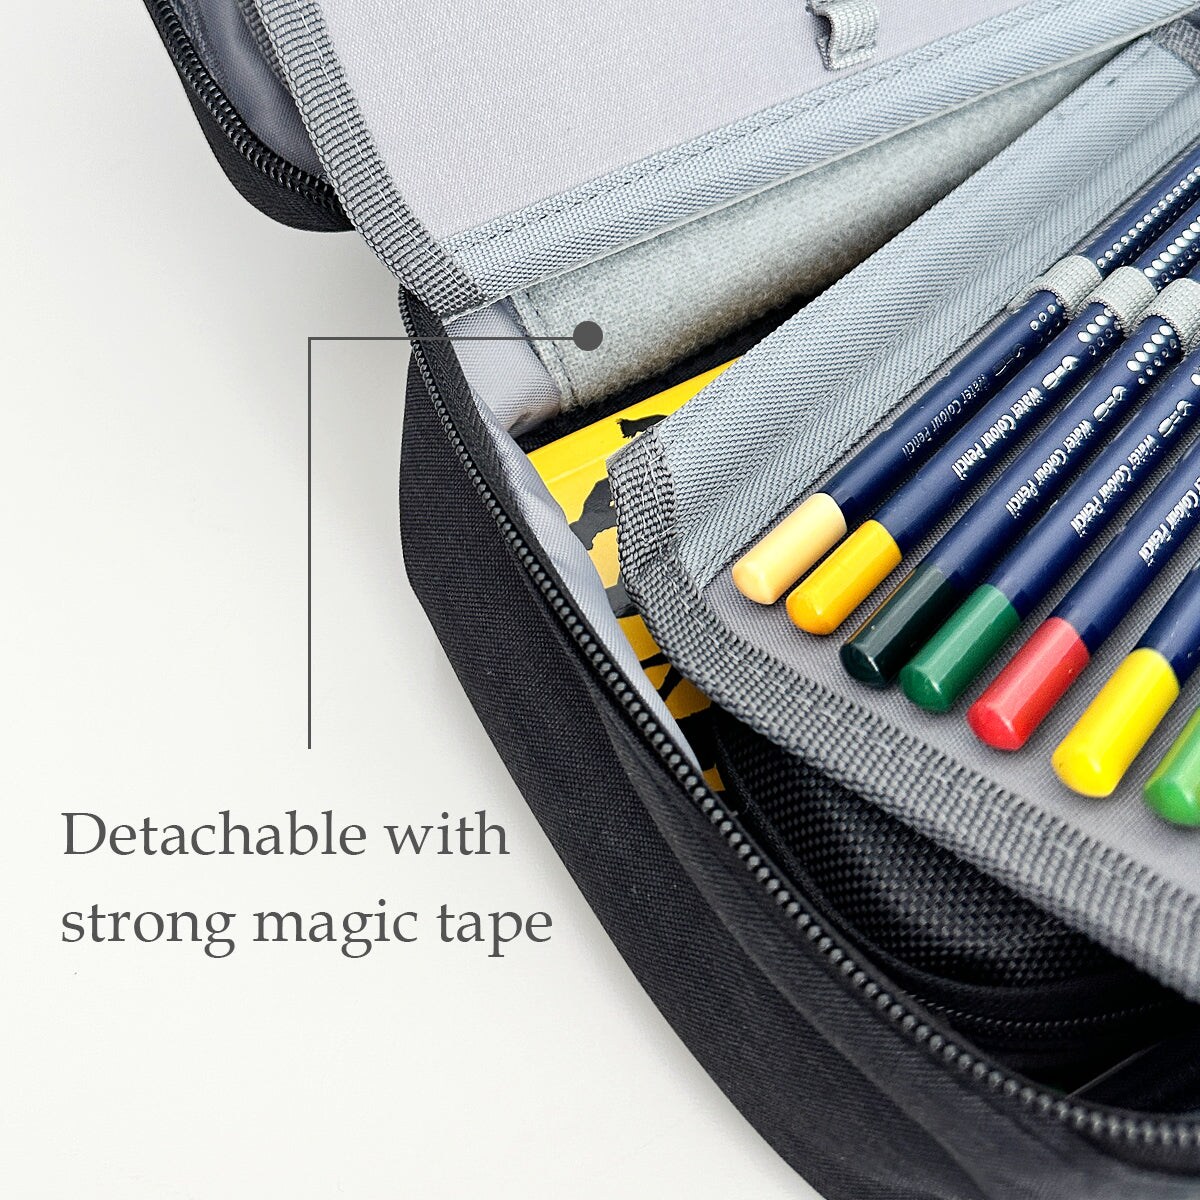 Wrapables Large Capacity 72 Slot Pencil Case for Colored Pencils, Stationery Pouch, Black